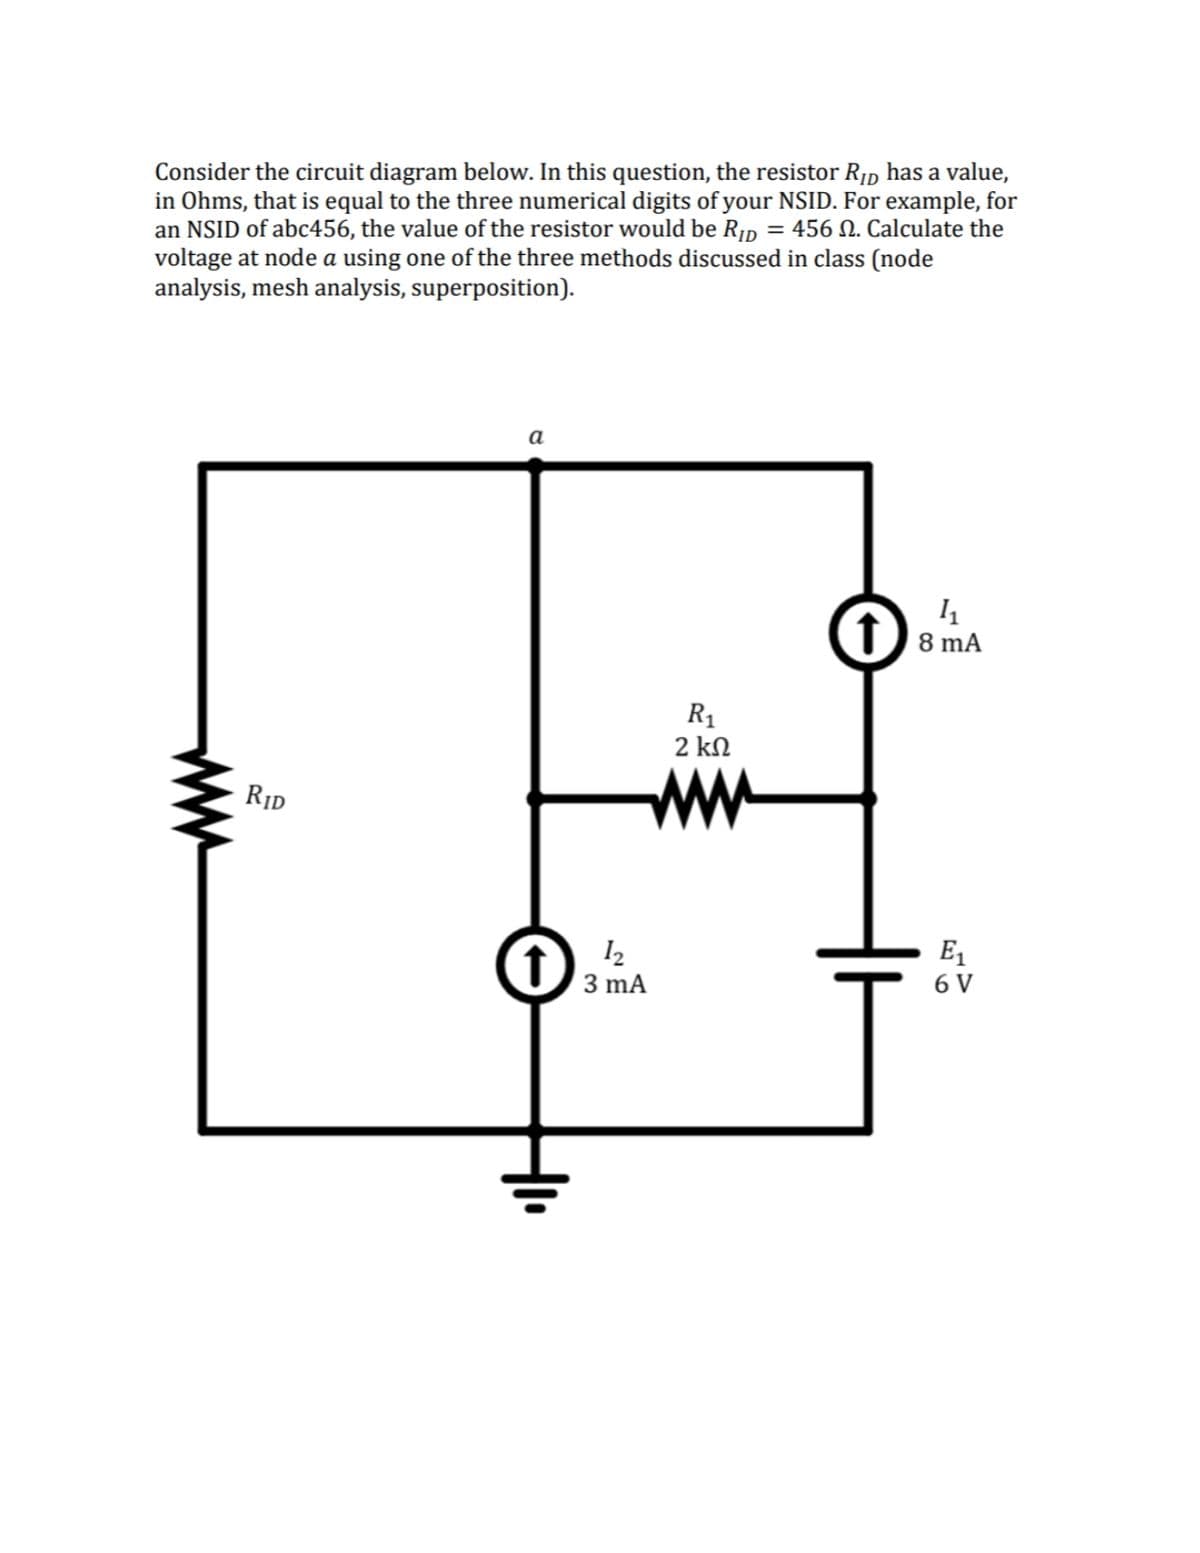 Consider the circuit diagram below. In this question, the resistor R1d has a value,
in Ohms, that is equal to the three numerical digits of your NSID. For example, for
an NSID of abc456, the value of the resistor would be R1p = 456 N. Calculate the
voltage at node a using one of the three methods discussed in class (node
analysis, mesh analysis, superposition).
а
(f) 8 mA
R1
2 kN
ww
RID
E1
I2
(1) 3 mA
6 V
ww
